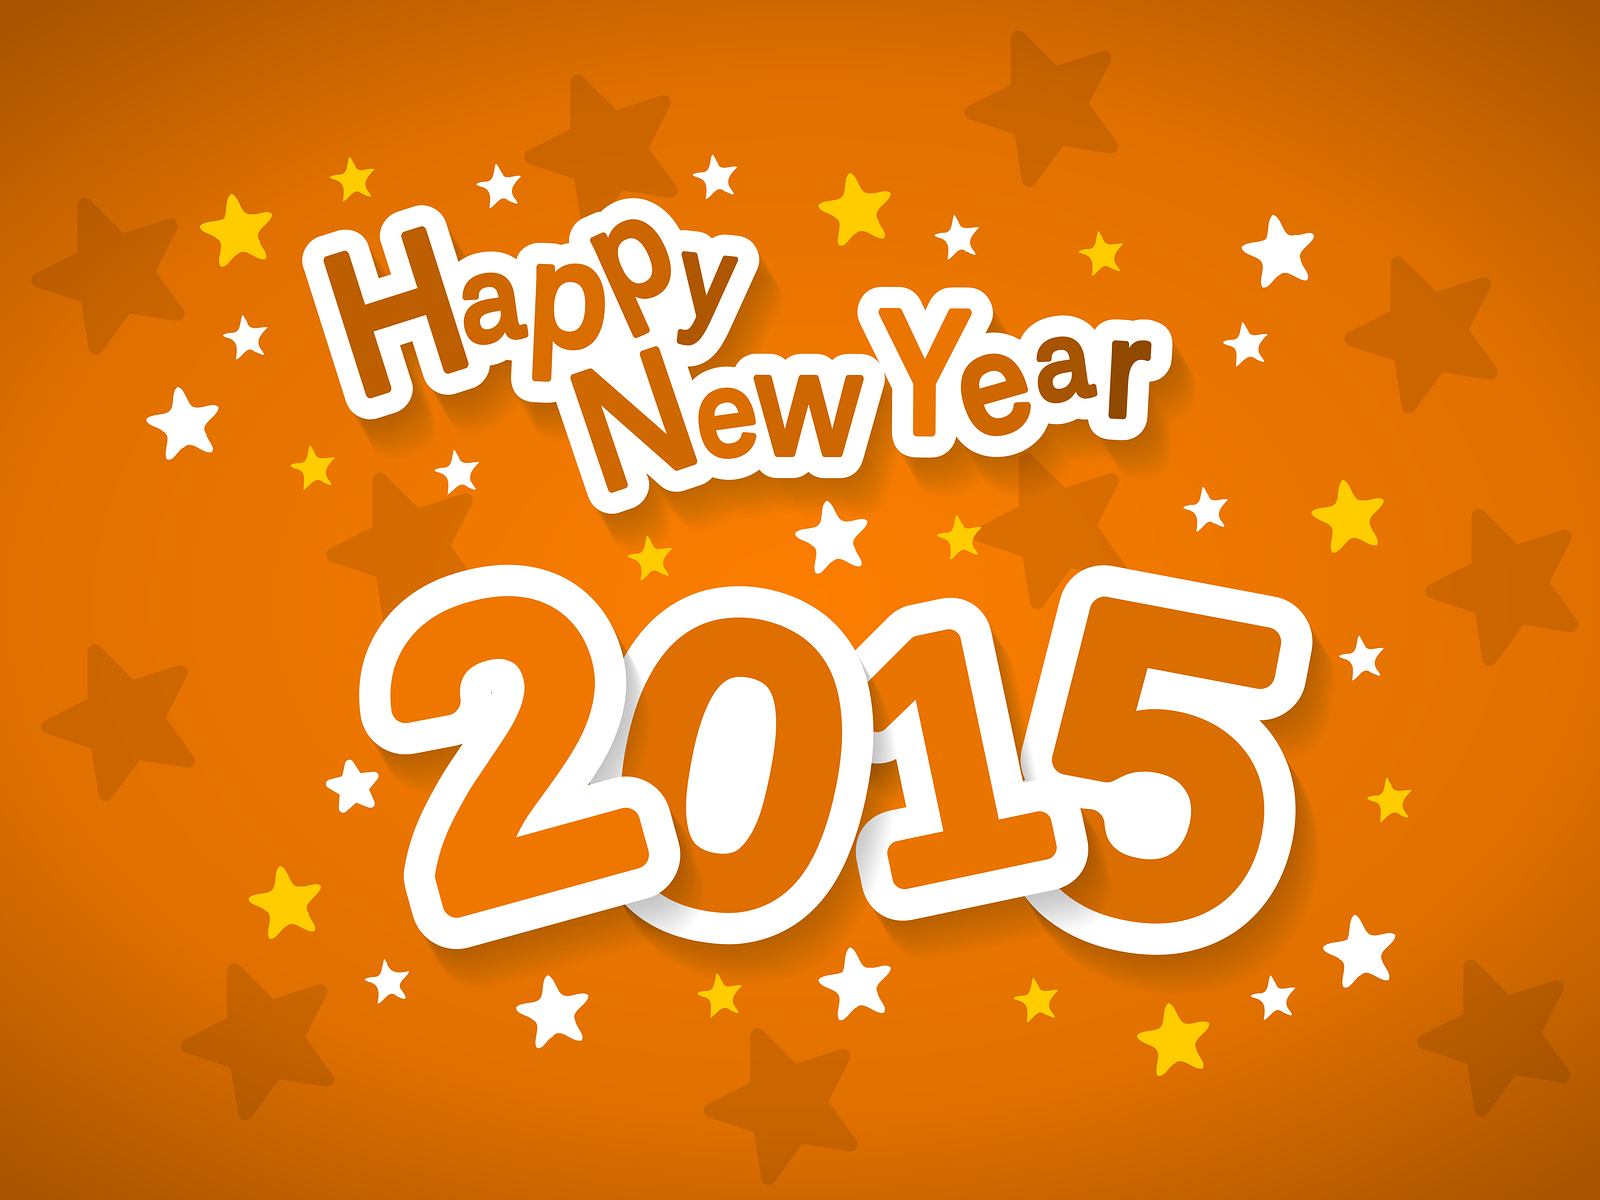 Nice wallpapers New Year 2015 1600x1200px